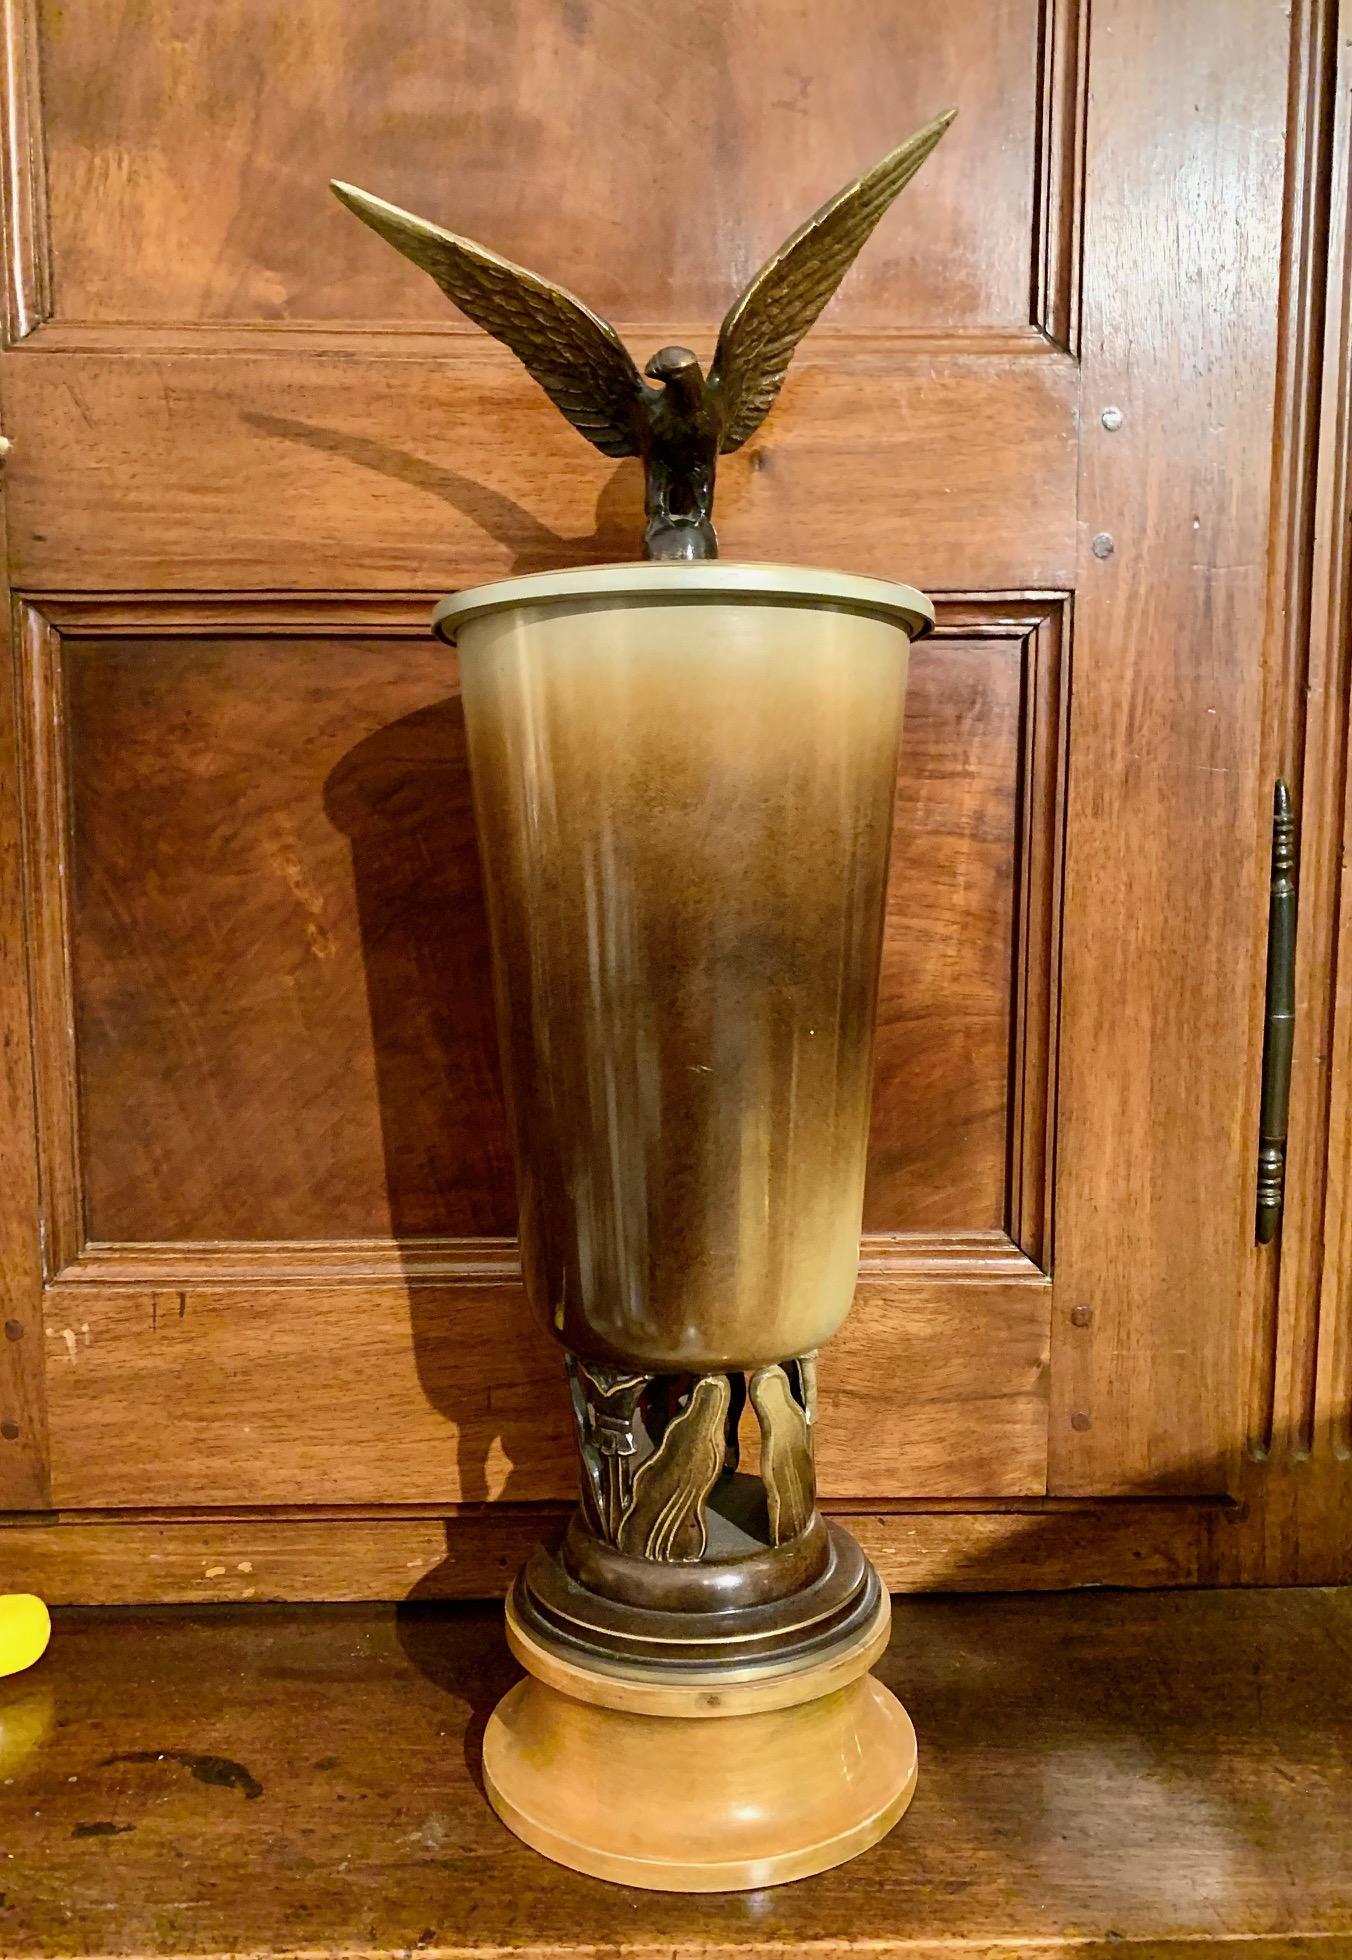 A vase with a Ystad Bronze metal lid, mounted on a wooden pedestal with vegetal decoration at the base, from where the glass emerges, finished with a lid with the figure of an Eagle.